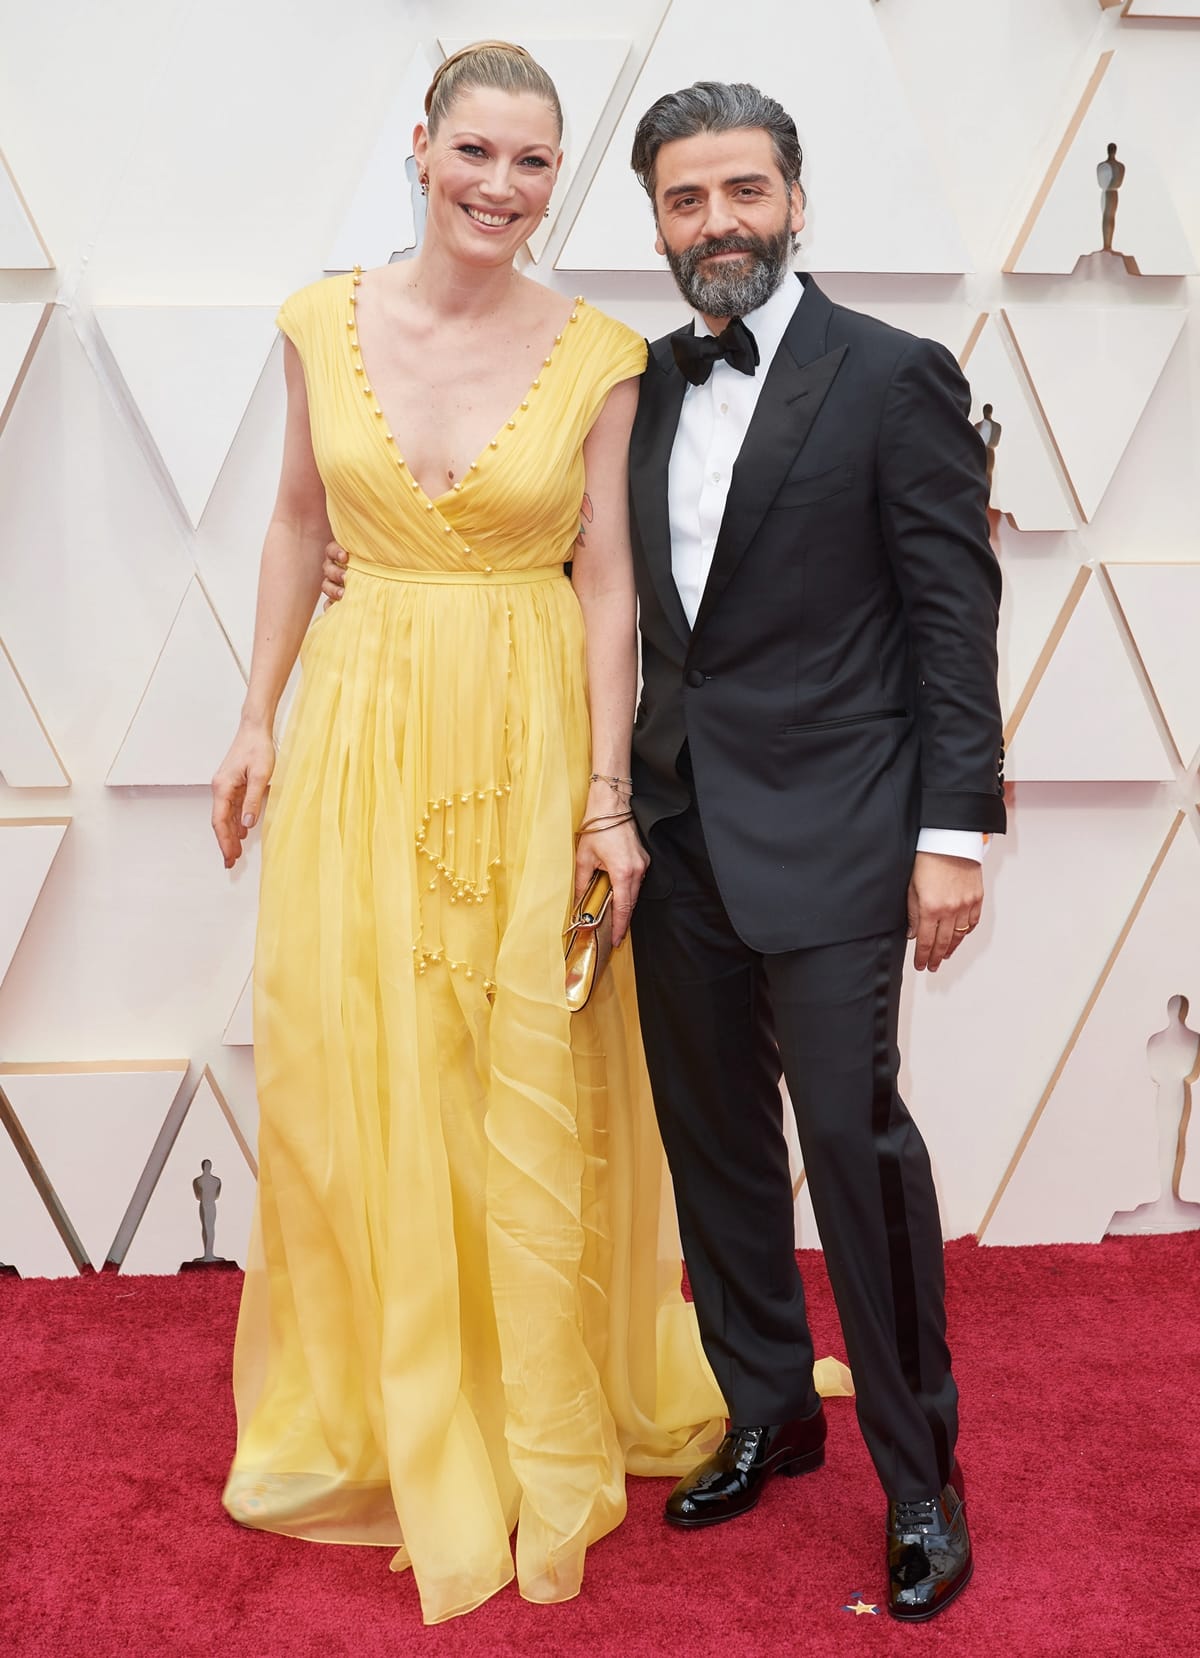 Oscar Isaac has been married to Danish documentary producer and director Elvira Lind since 2017